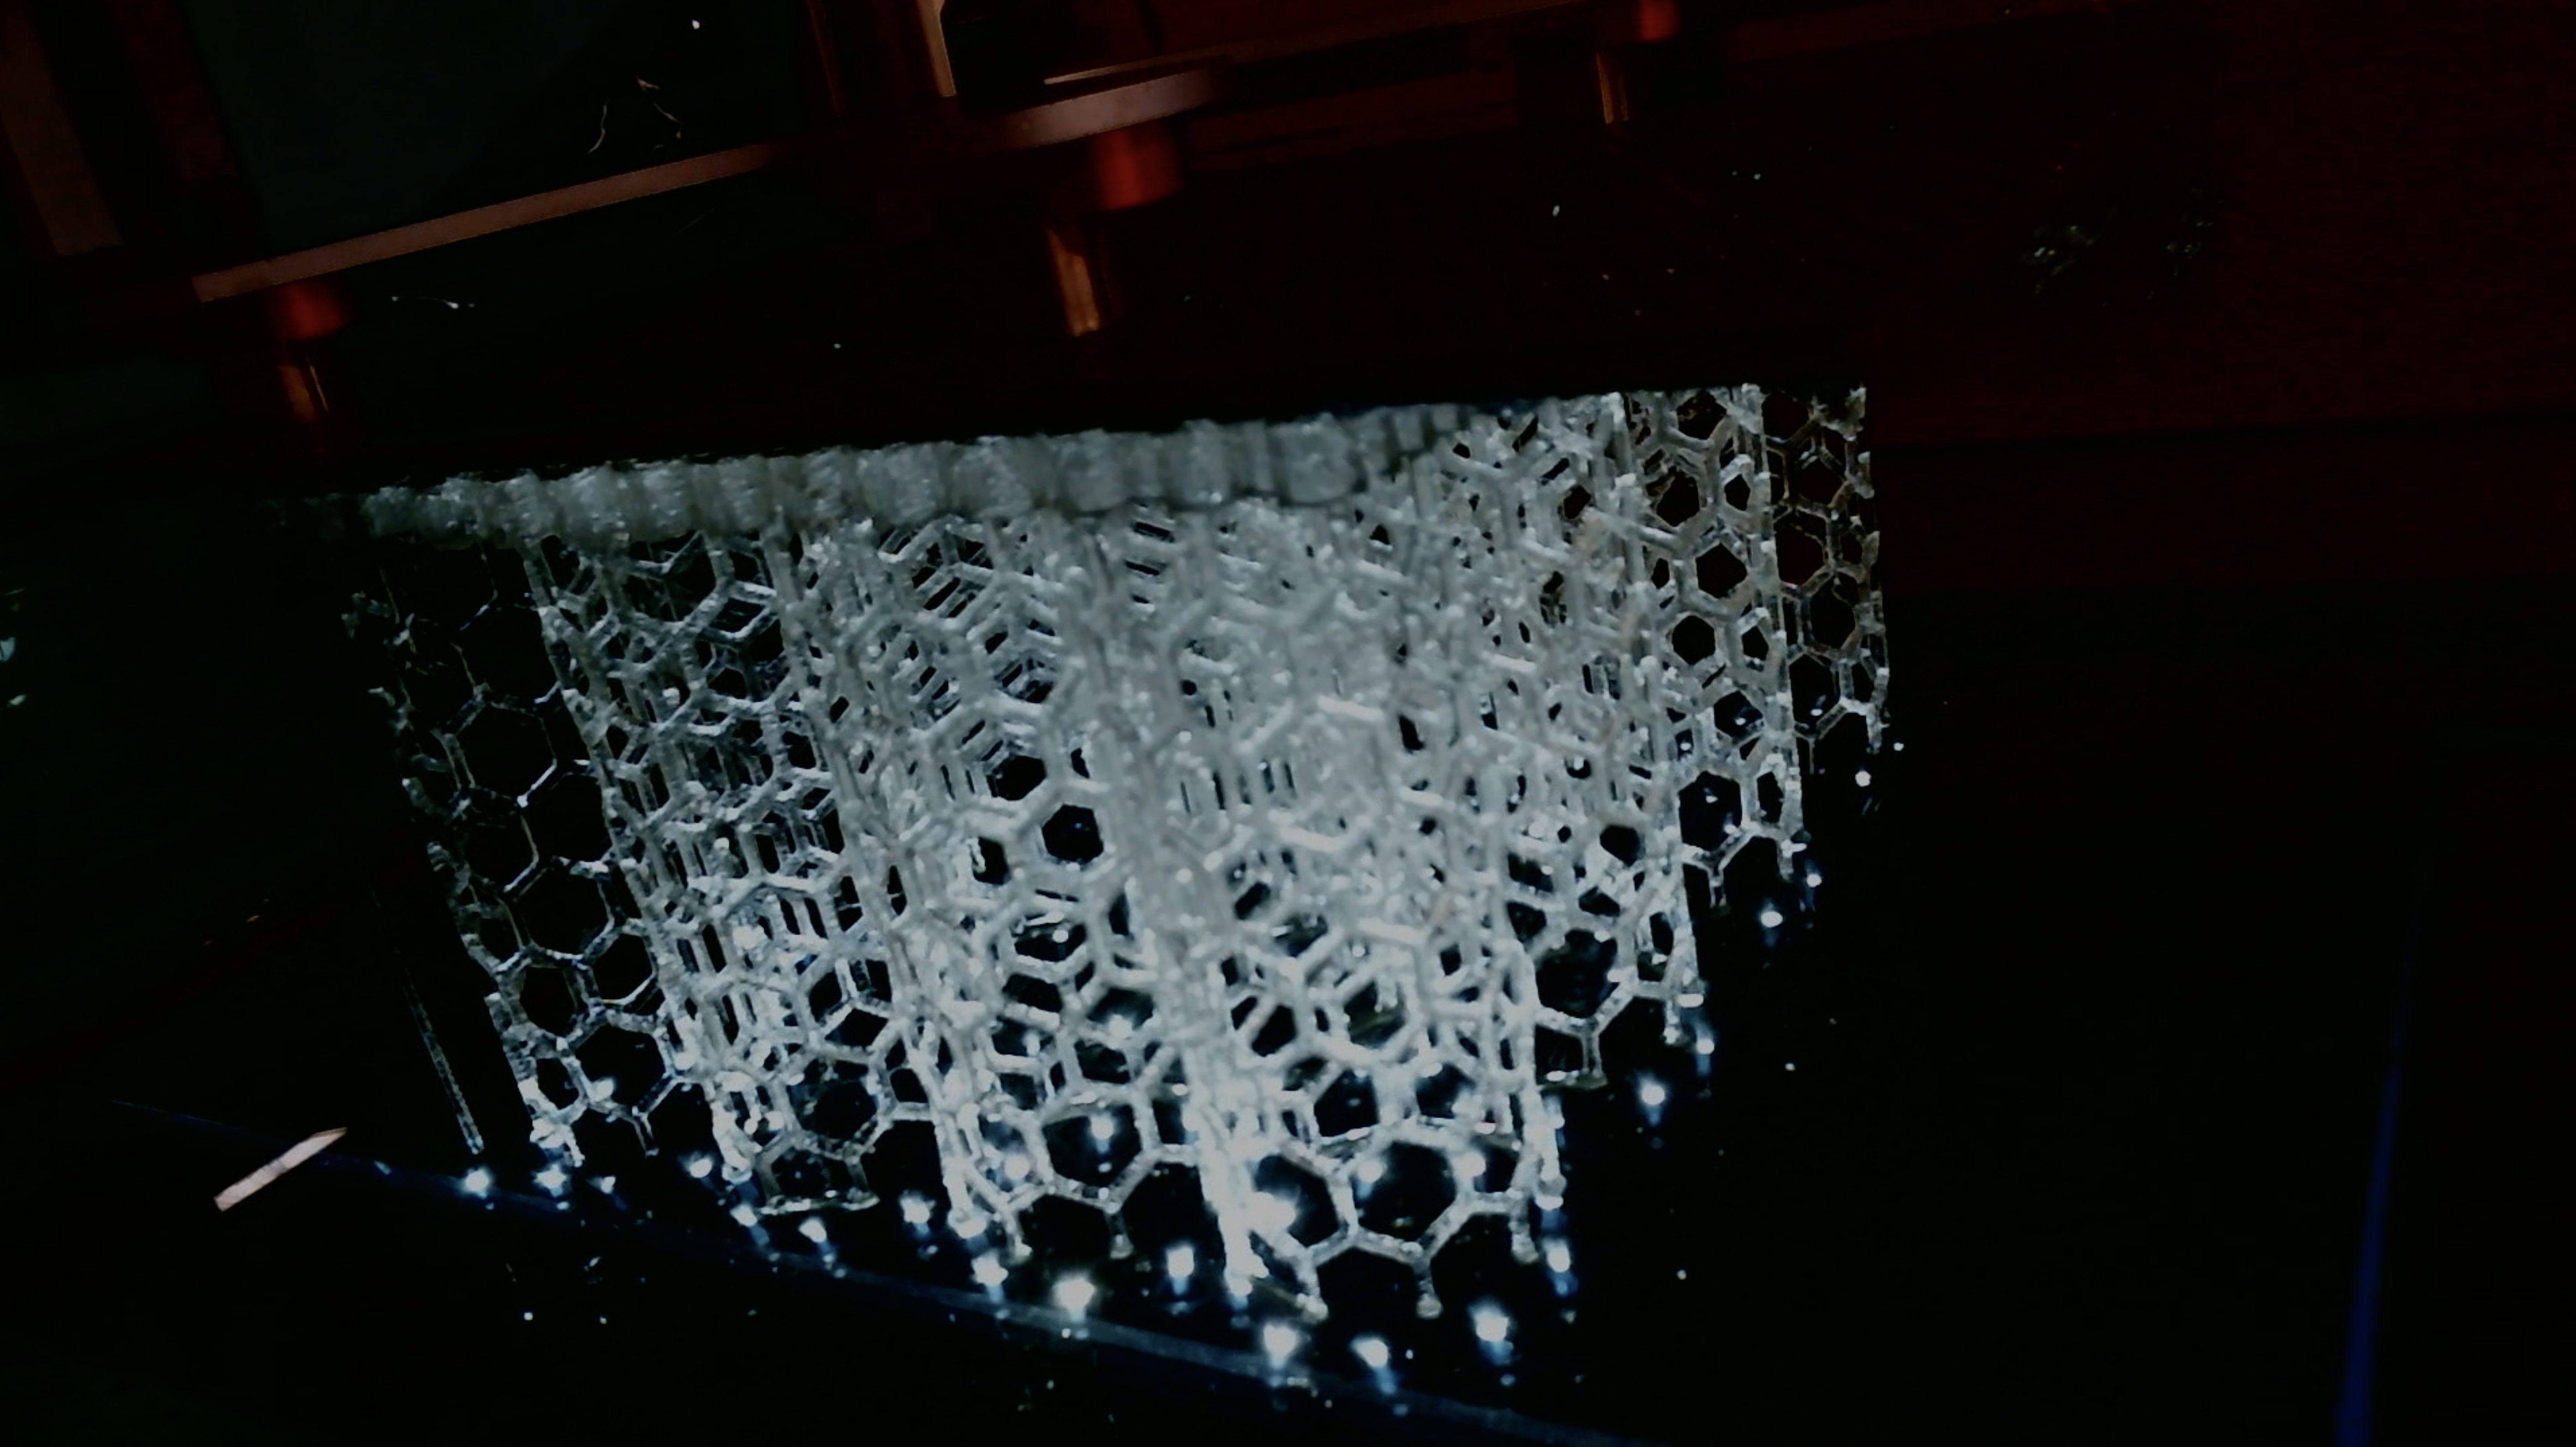 Close-up of 3D printed object emerging from the vat. Photo via Northwestern University.